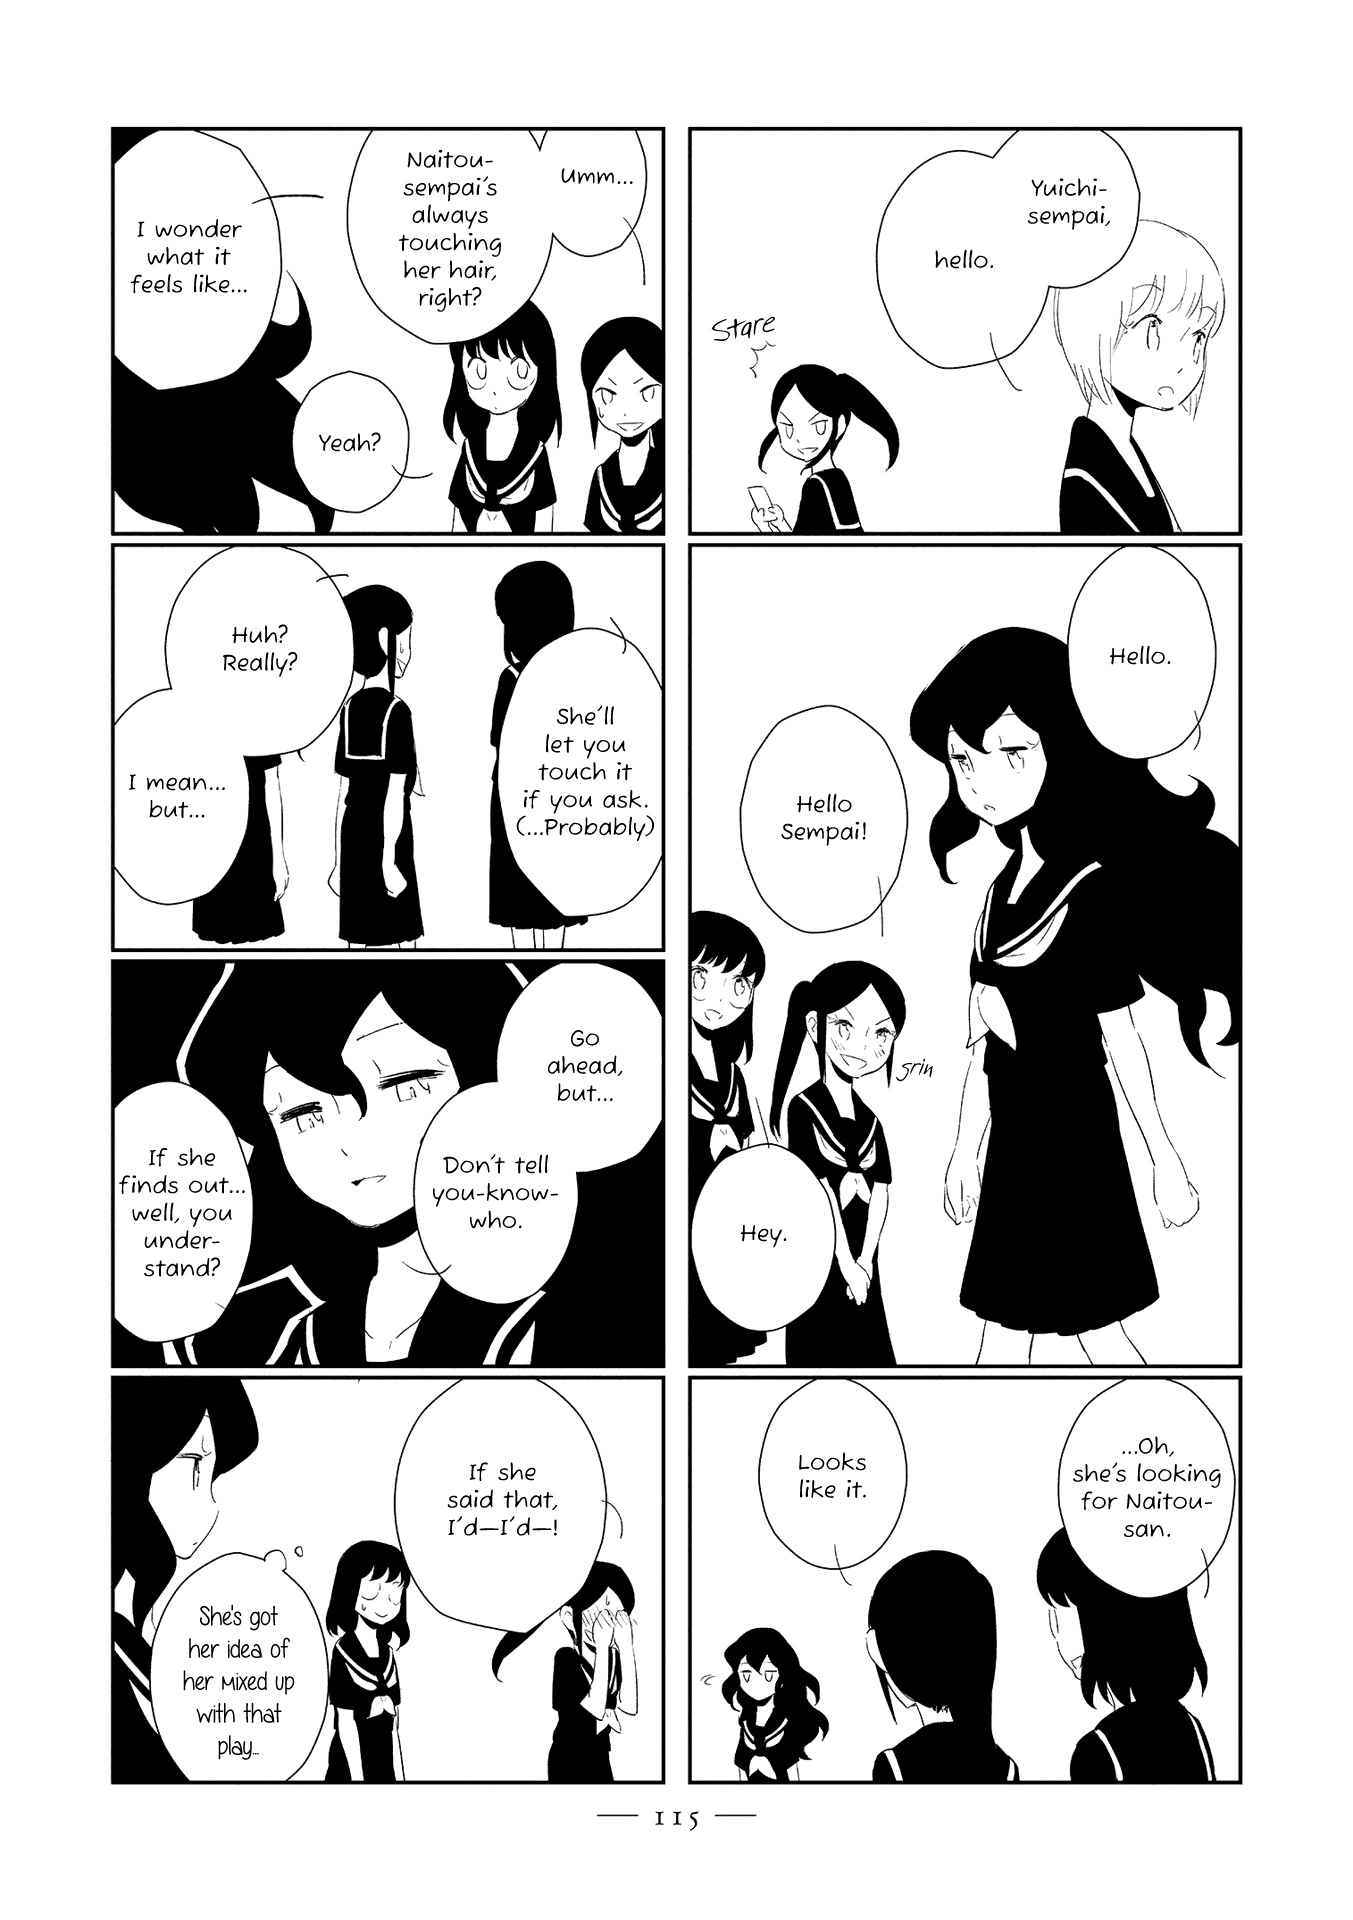 Witch Meets Knight - Page 3